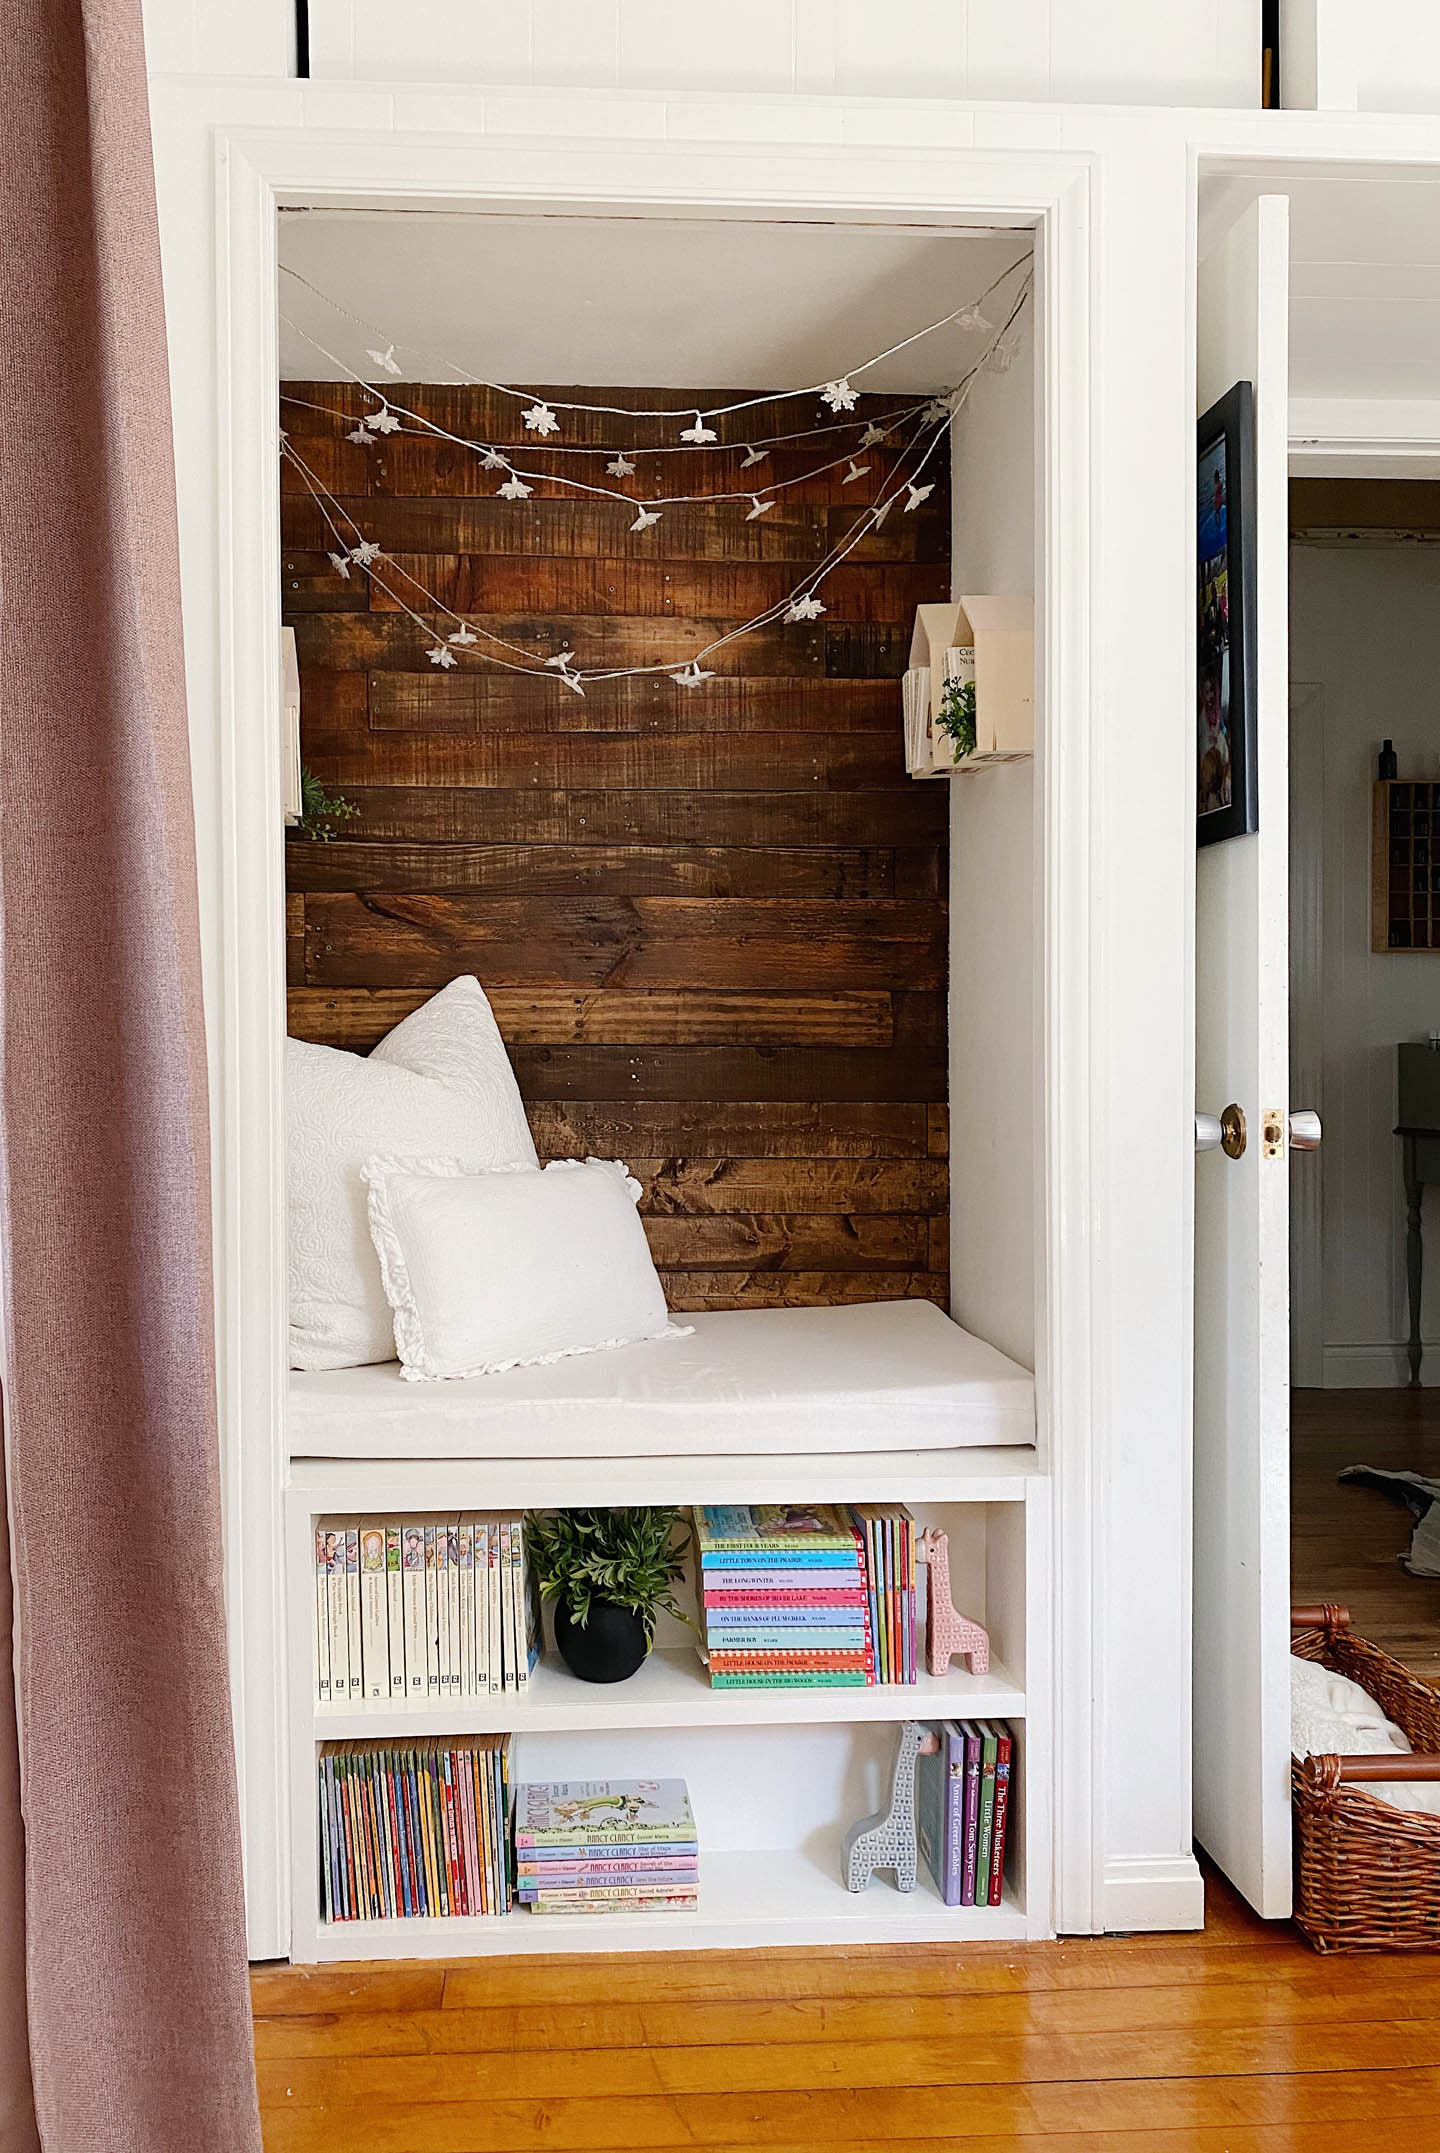 Creating A Cozy Reading Nook At Home: 5 Simple Steps